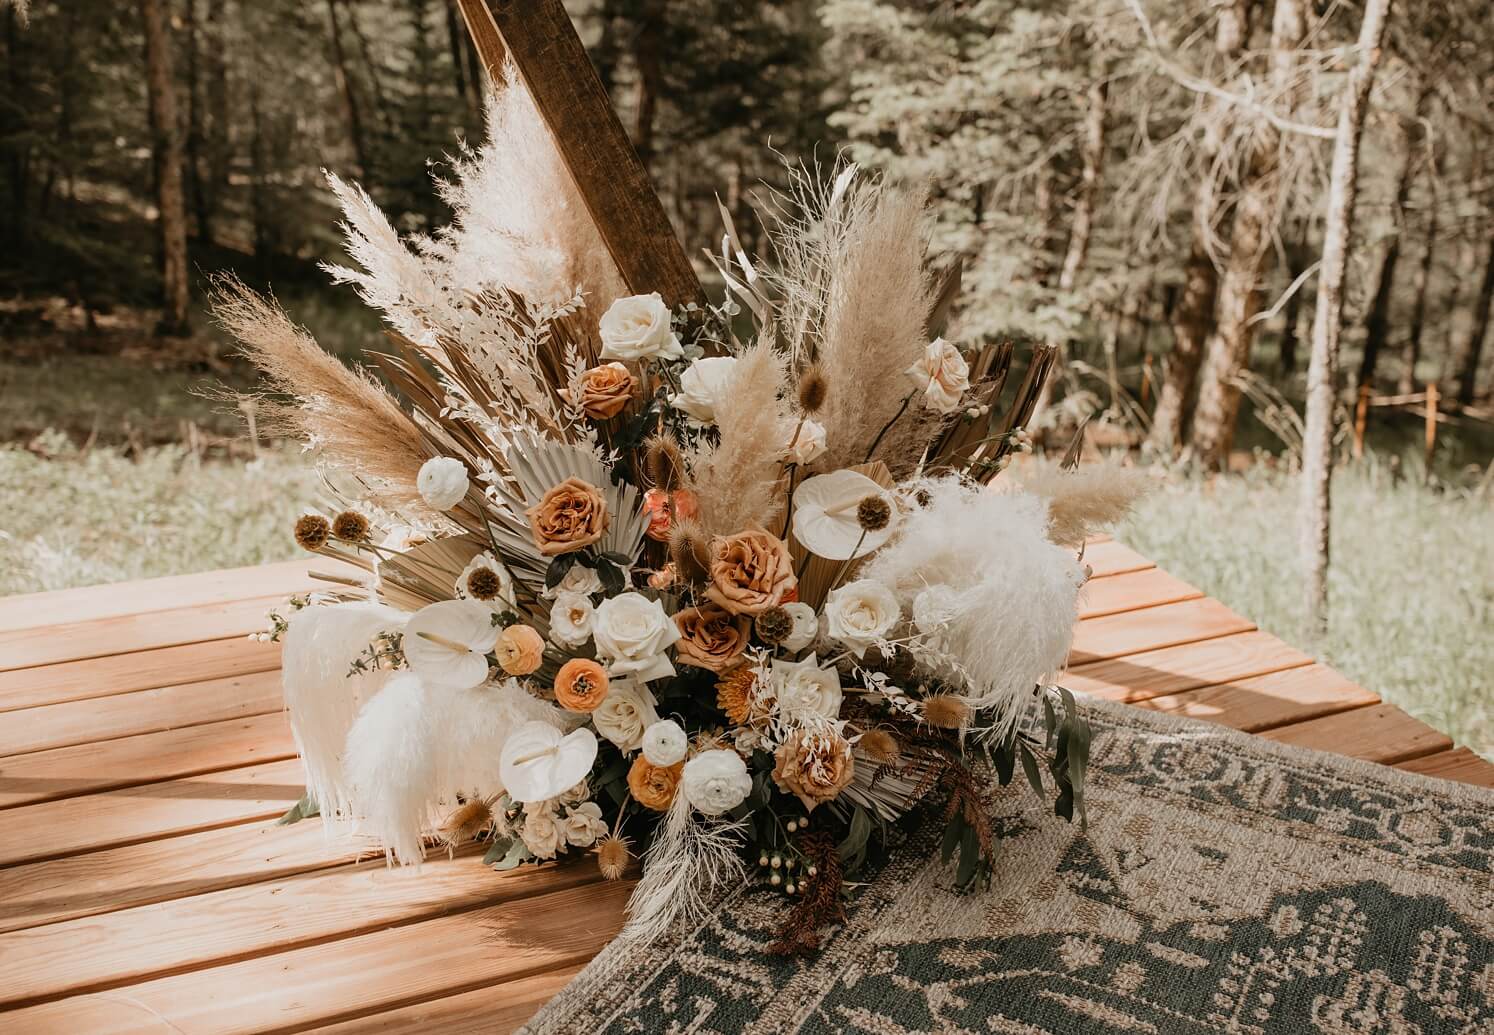 Wedding floral design: boho ceremony florals with pampas grass, fan leaves, and white and burnt orange flowers | McArthur Weddings and Events